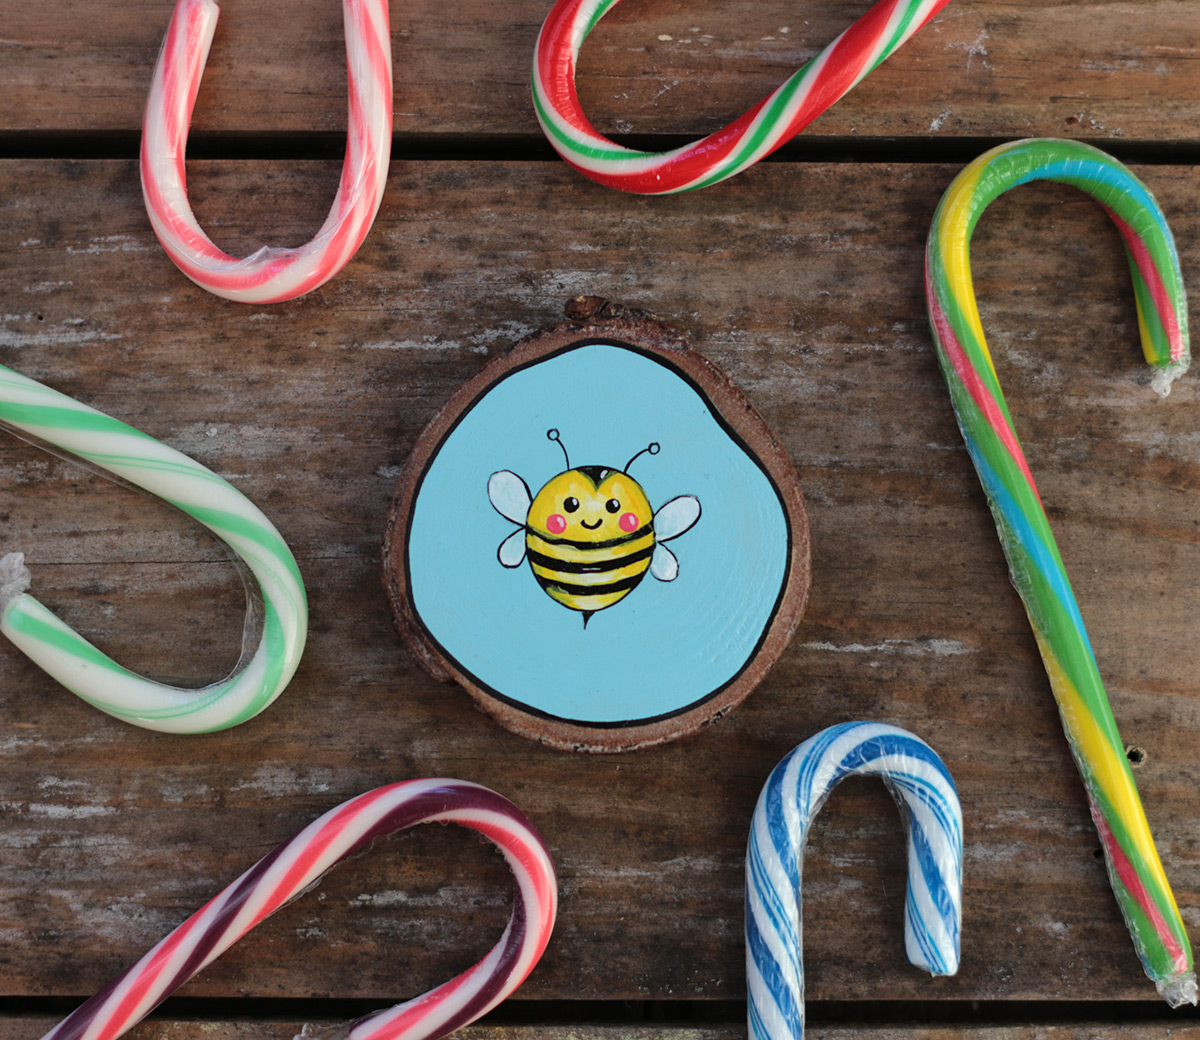 Bumble Bee Personalized Ornament Gift at The Weed Patch